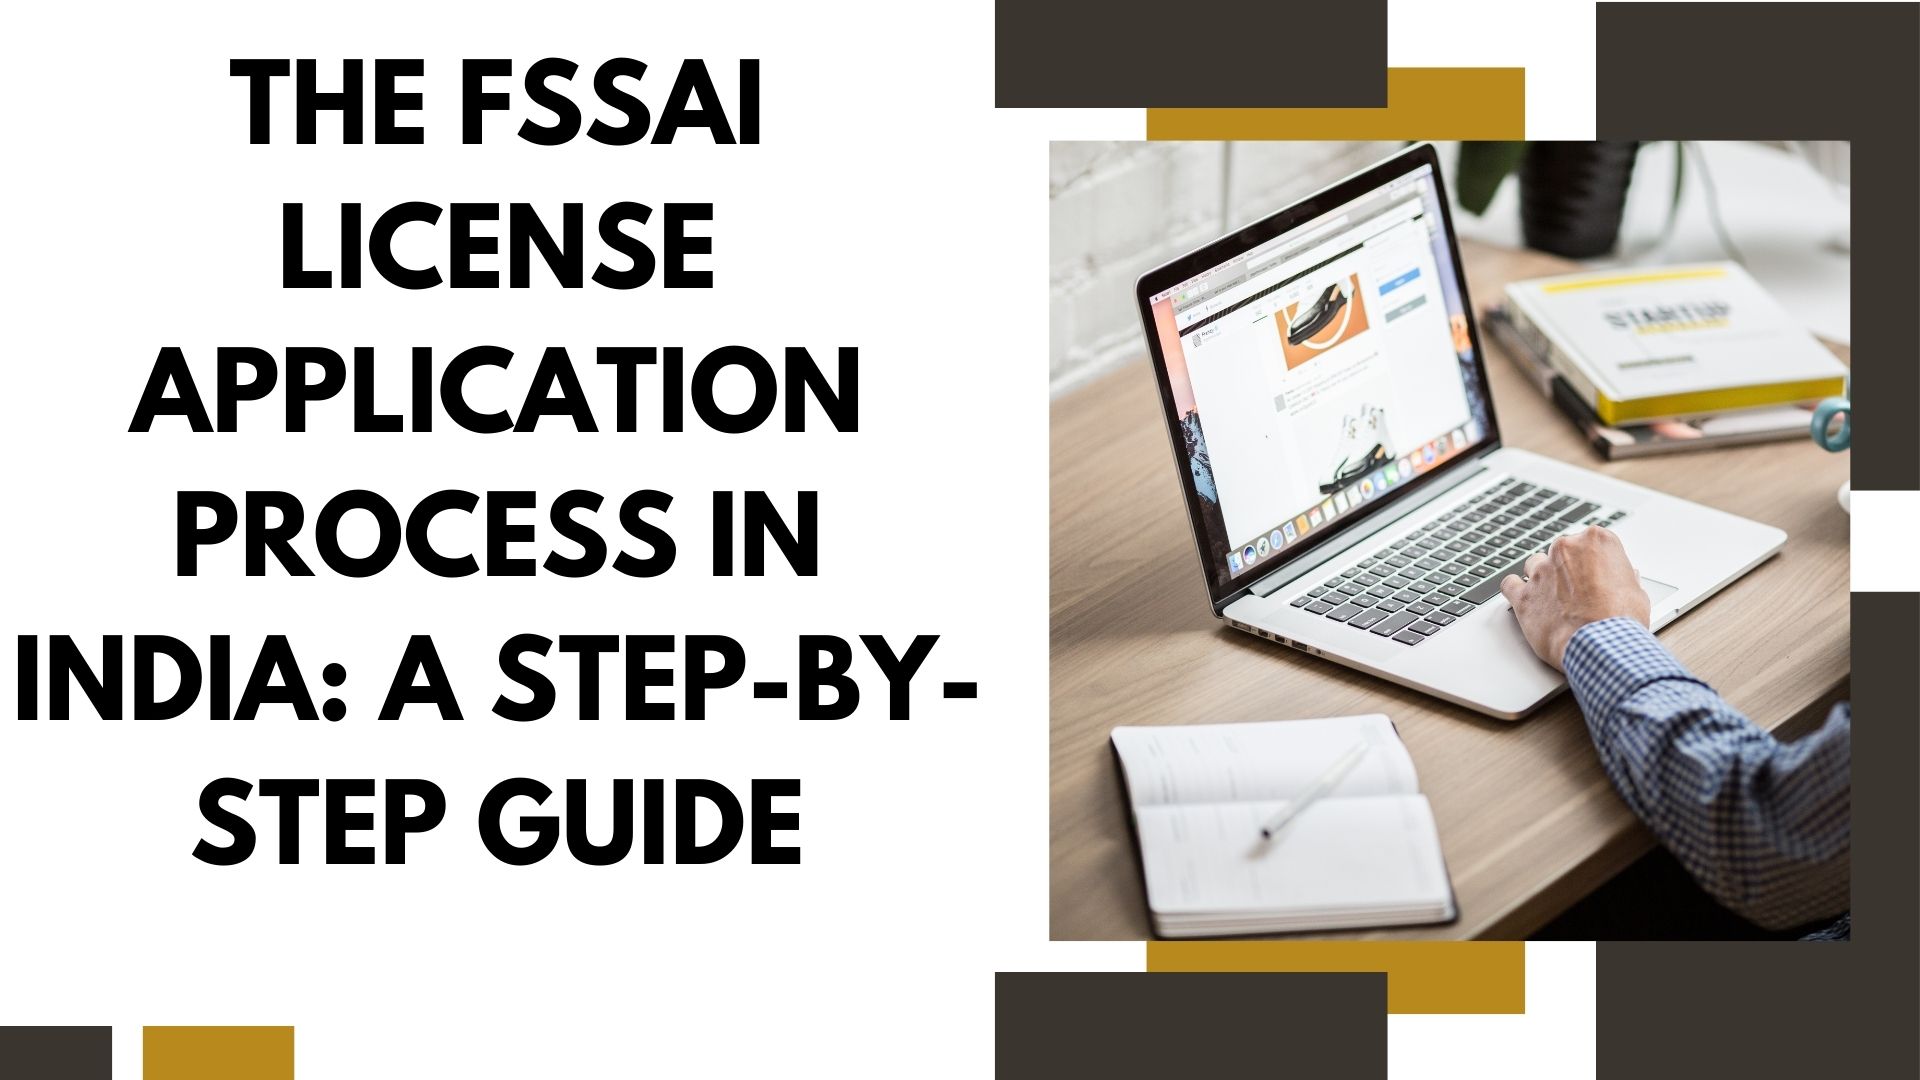 The FSSAI License Application Process in India A Step-by-Step Guide